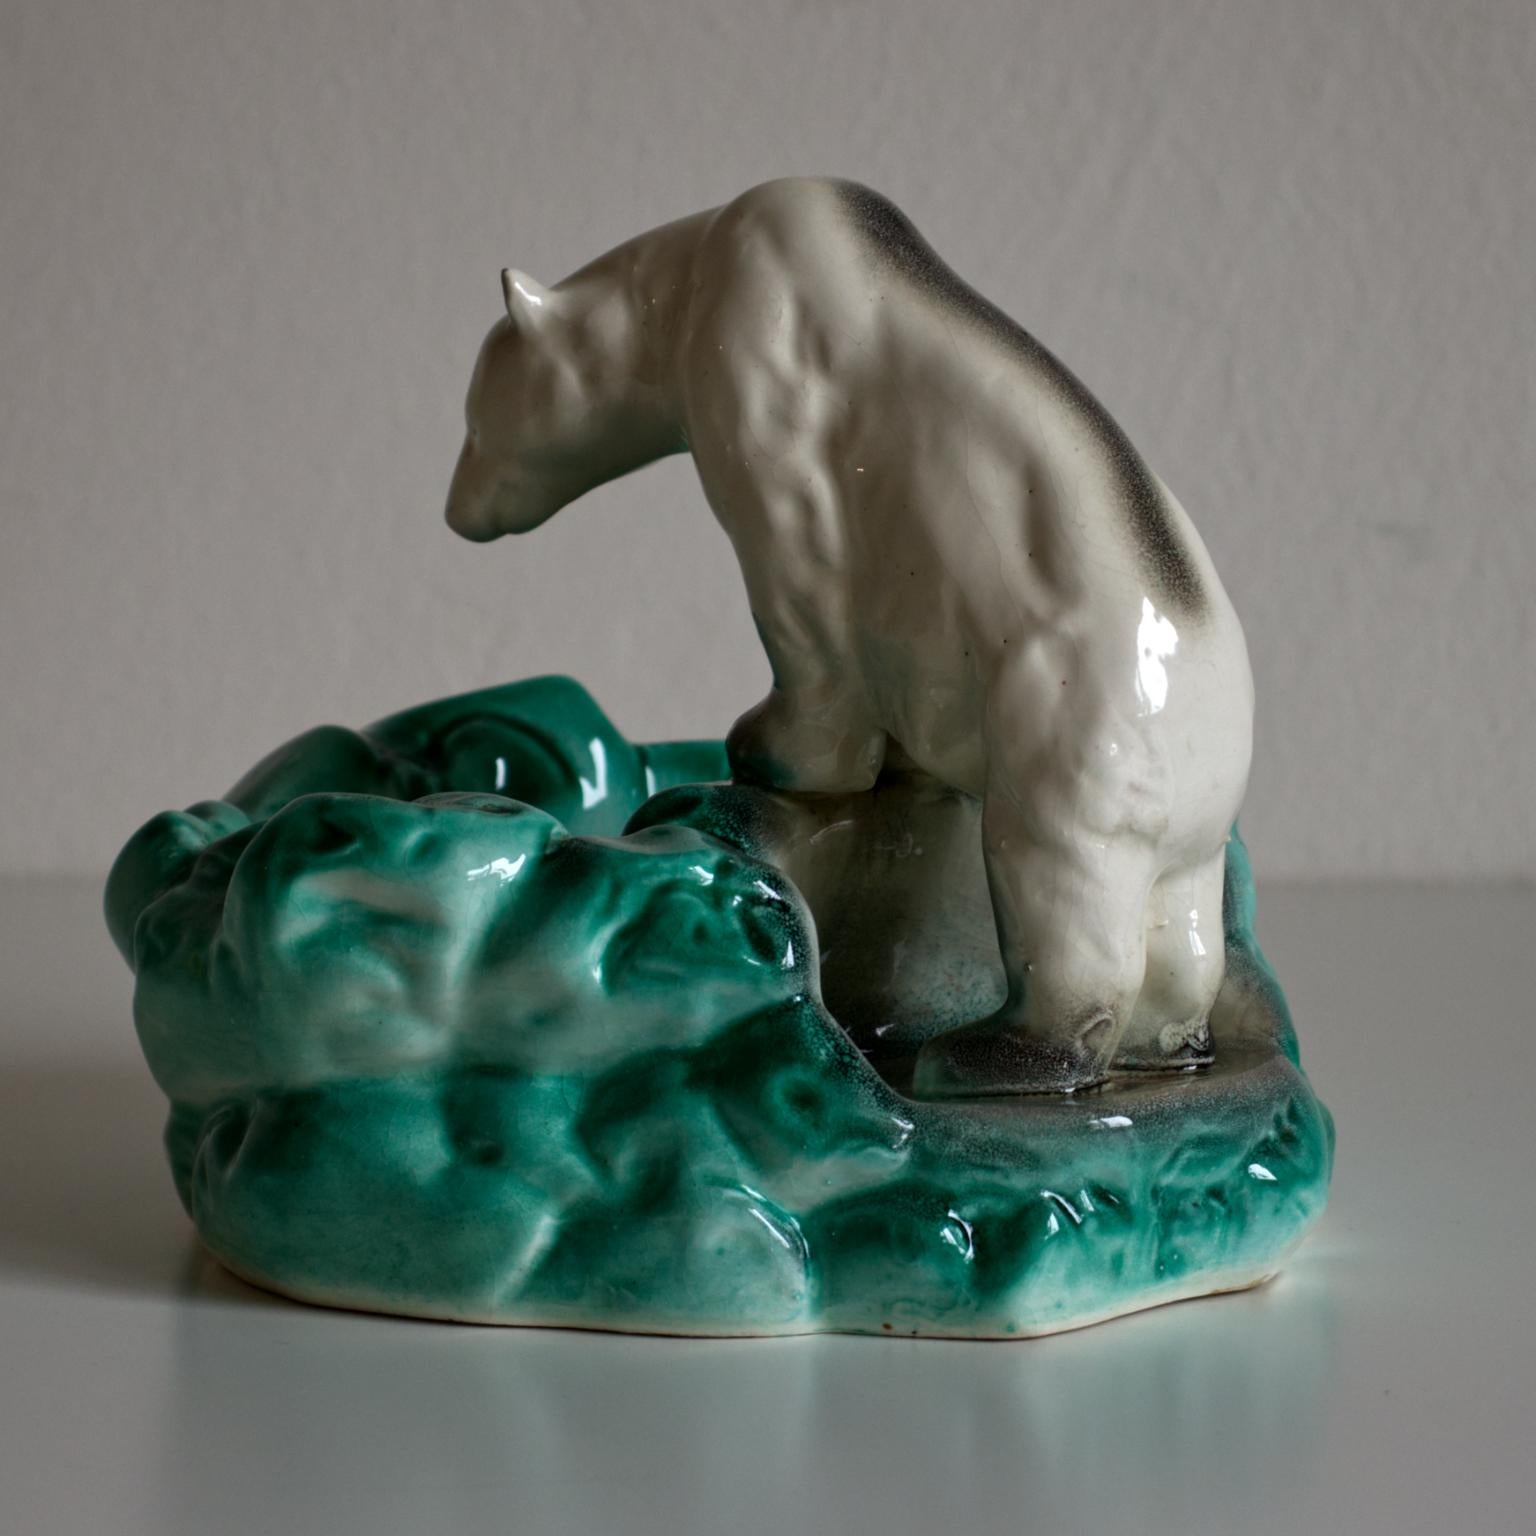 Polar bear at ice pool, a ceramic bowl manufactured by Jilove u Decína Pottery in Czechoslovakia in the 1930s. The bowl was designed to celebrate Nora, the first polar bear in the Prague Zoo in 1932. The piece is marked, Jilove u Decína Pottery made